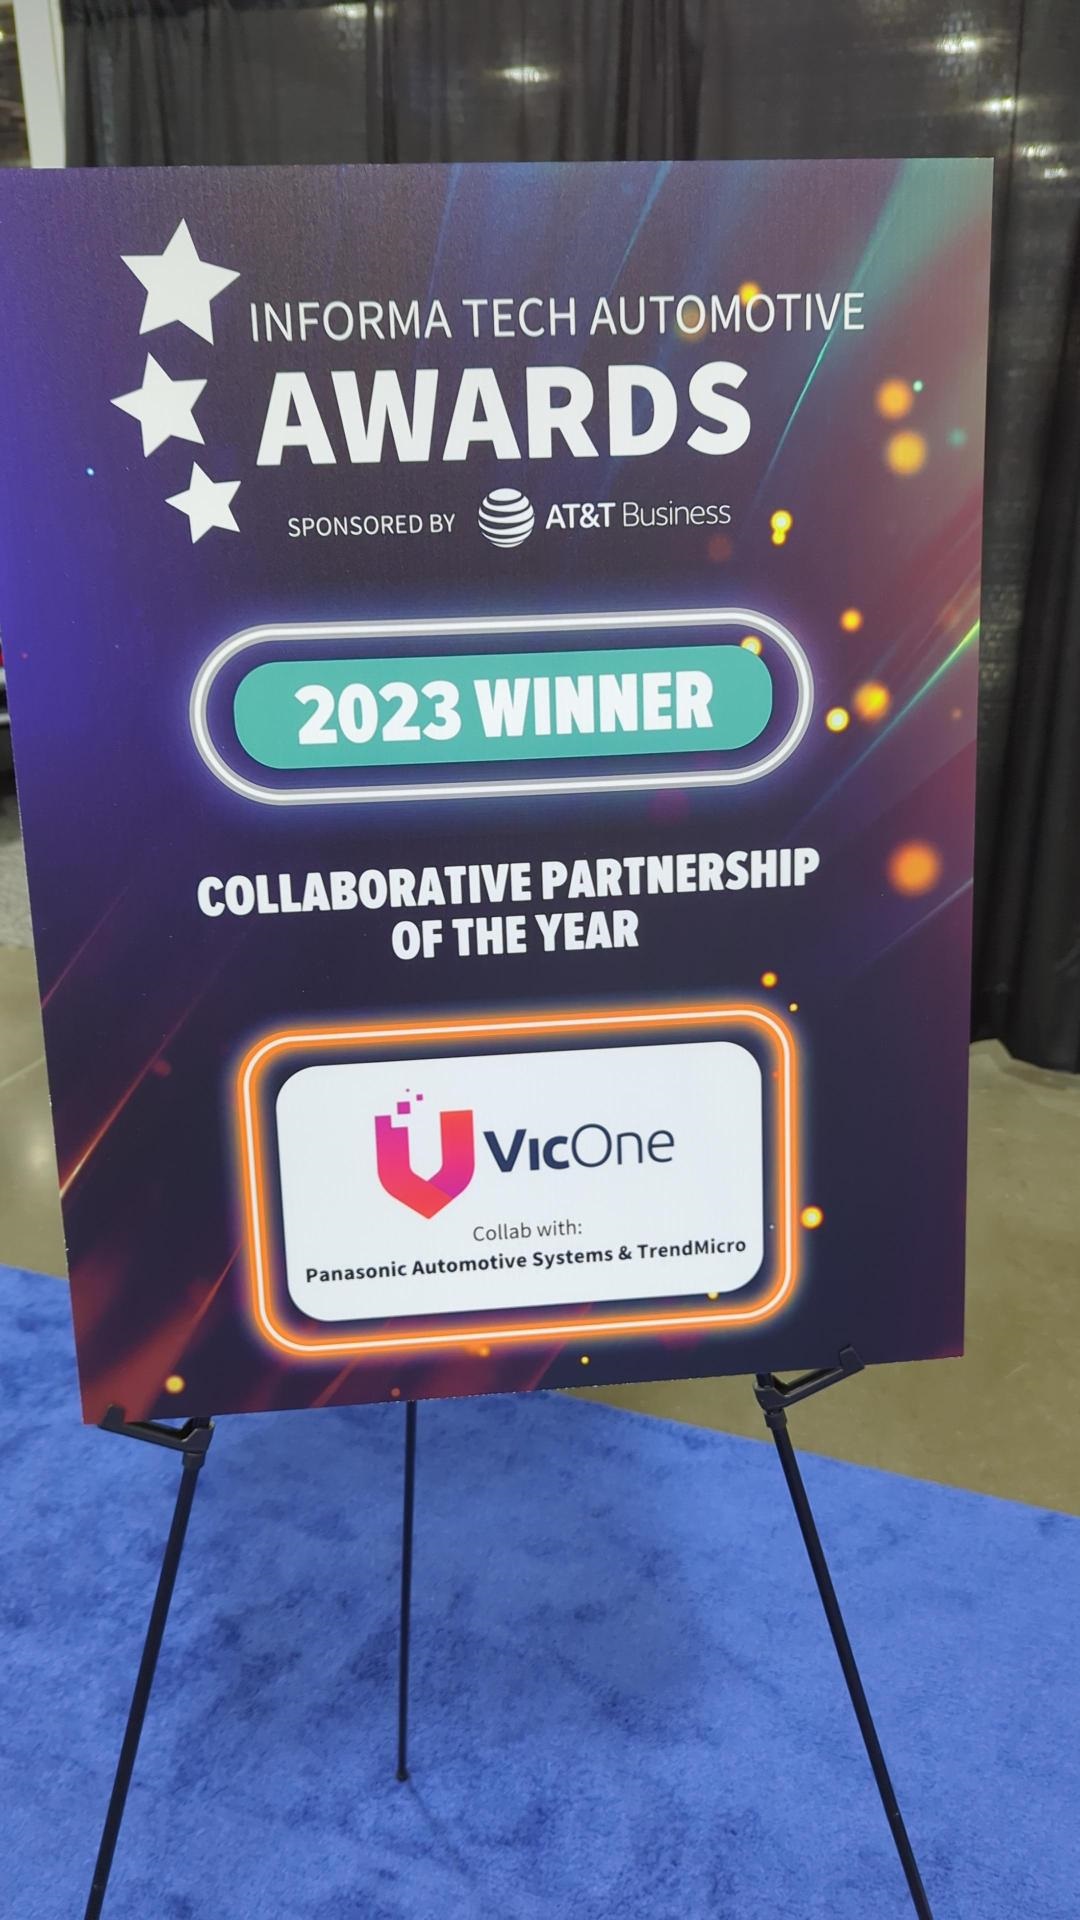 Kategorie "Collaborative Partnership of the Year"